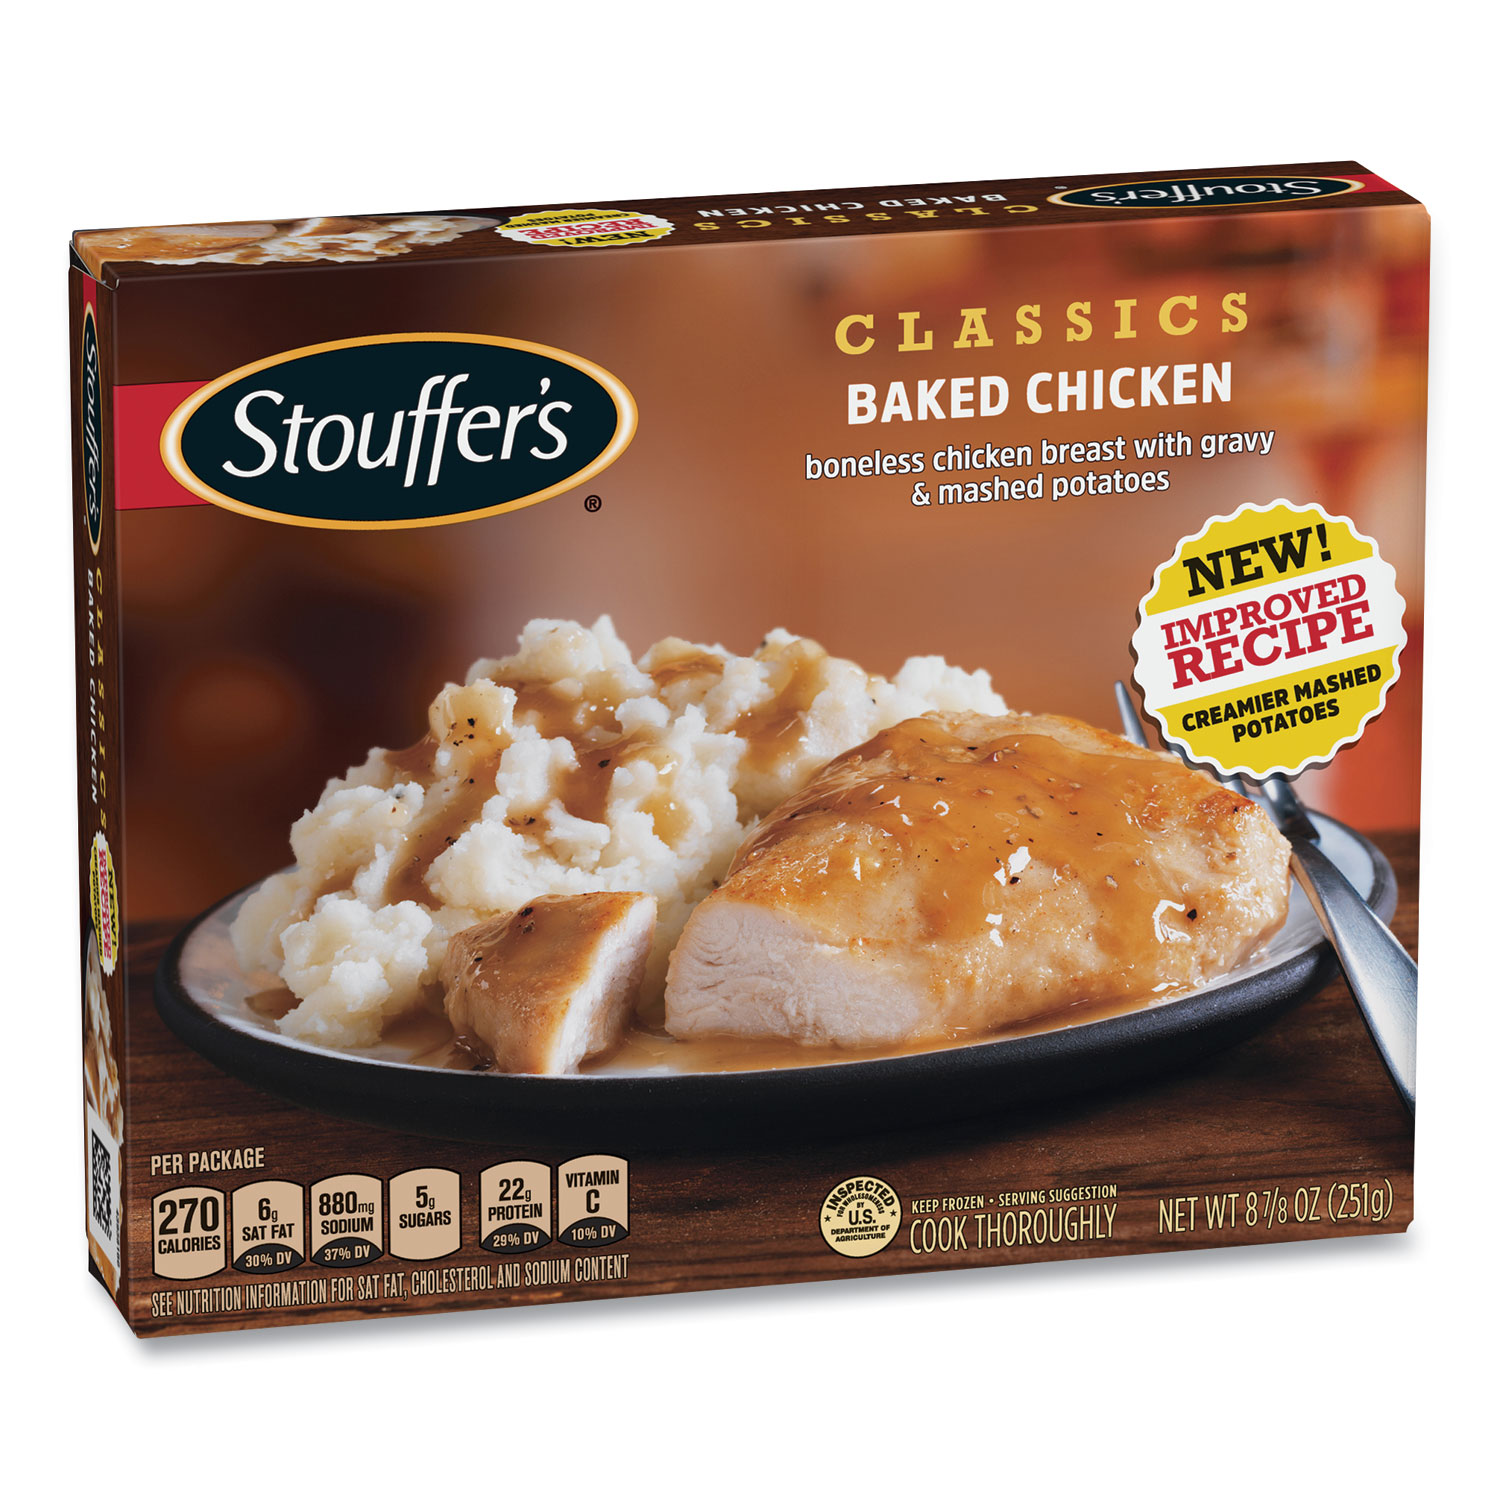  Stouffer's 101706 Classics Baked Chicken with Mashed Potatoes, 8.88 oz Box, 3 Boxes/Pack, Free Delivery in 1-4 Business Days (GRR90300130) 